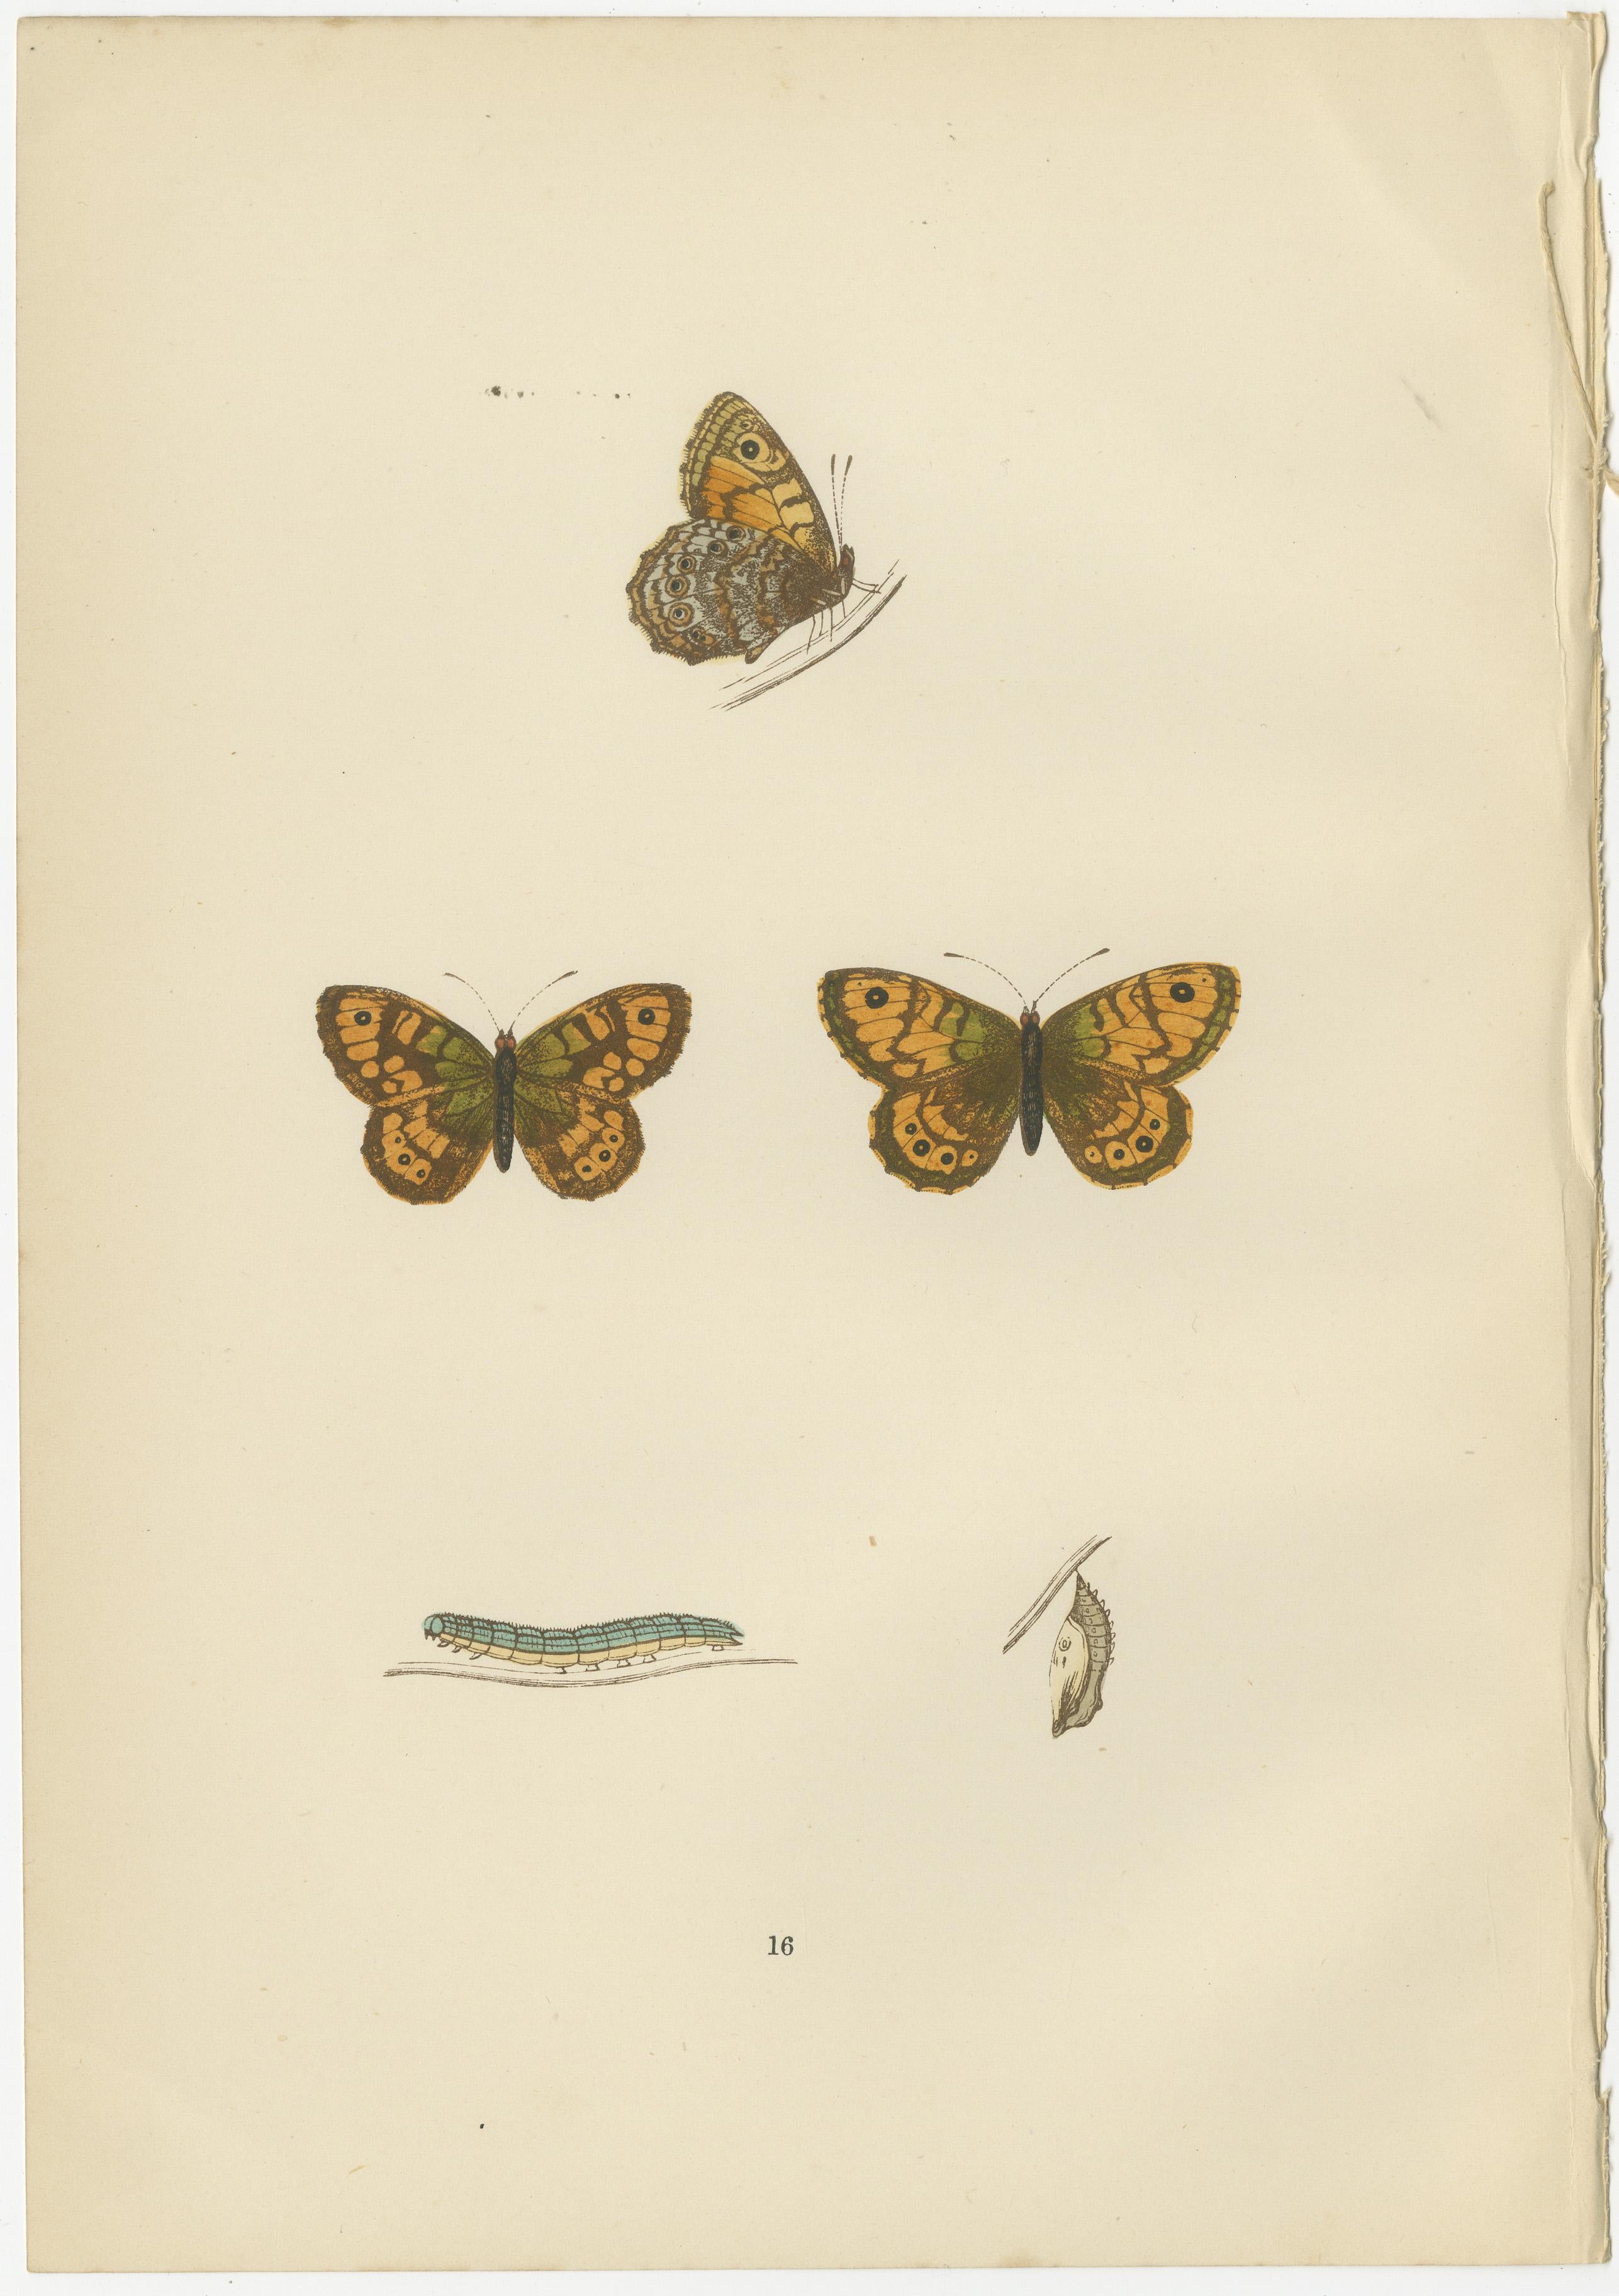 The butterflies depicted in the images represent species from the British Isles, from 'A History of British Butterflies' by Morris. They are original hand-coloured antique prints. Here's some information about each species:

1. **Gatekeeper (Pyronia